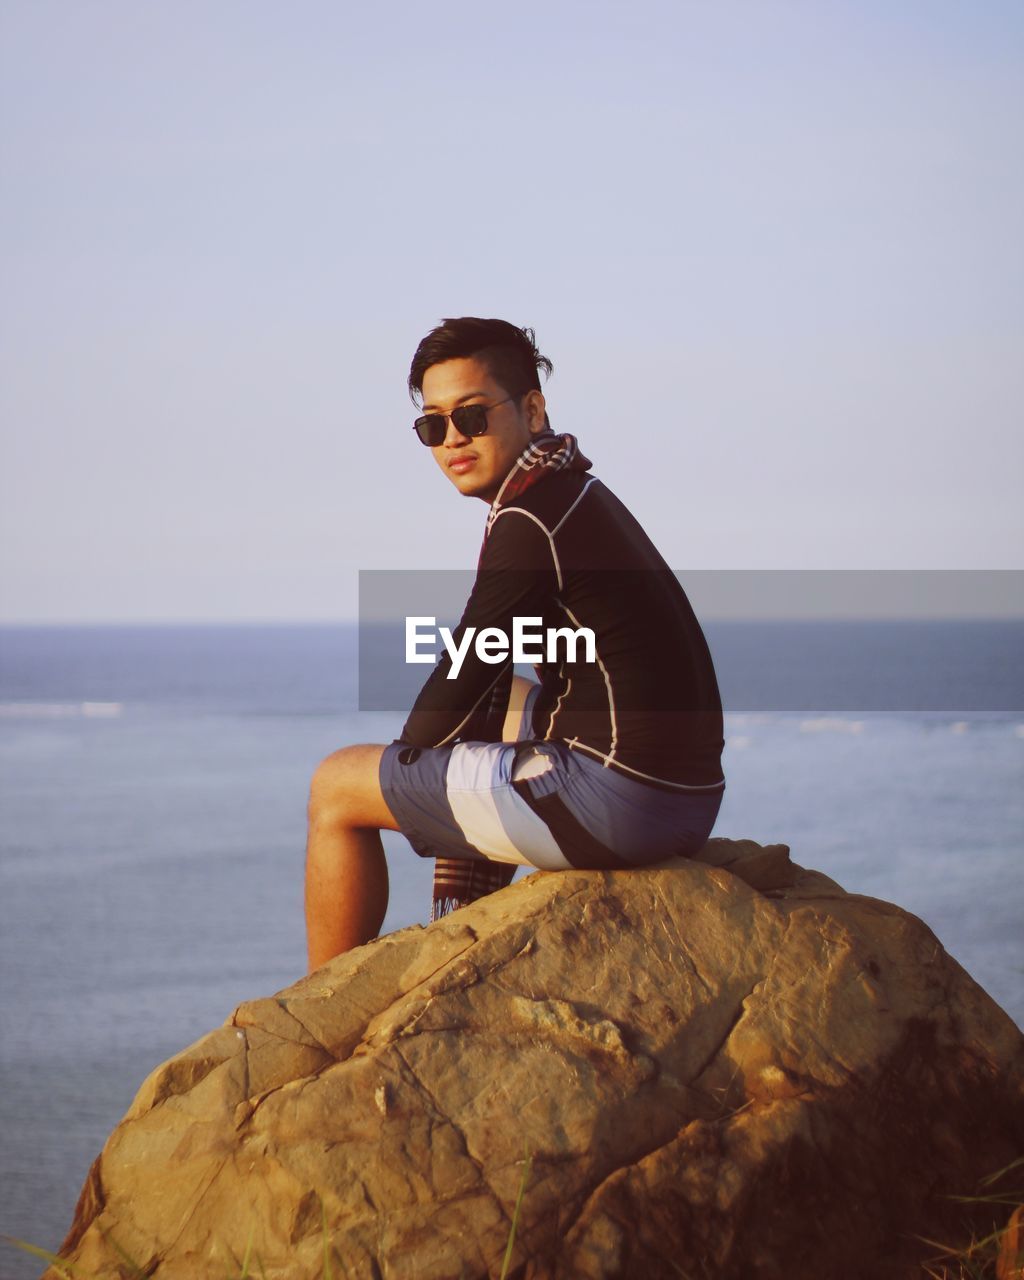 Portrait of young man in sunglasses sitting on rock at beach against clear sky